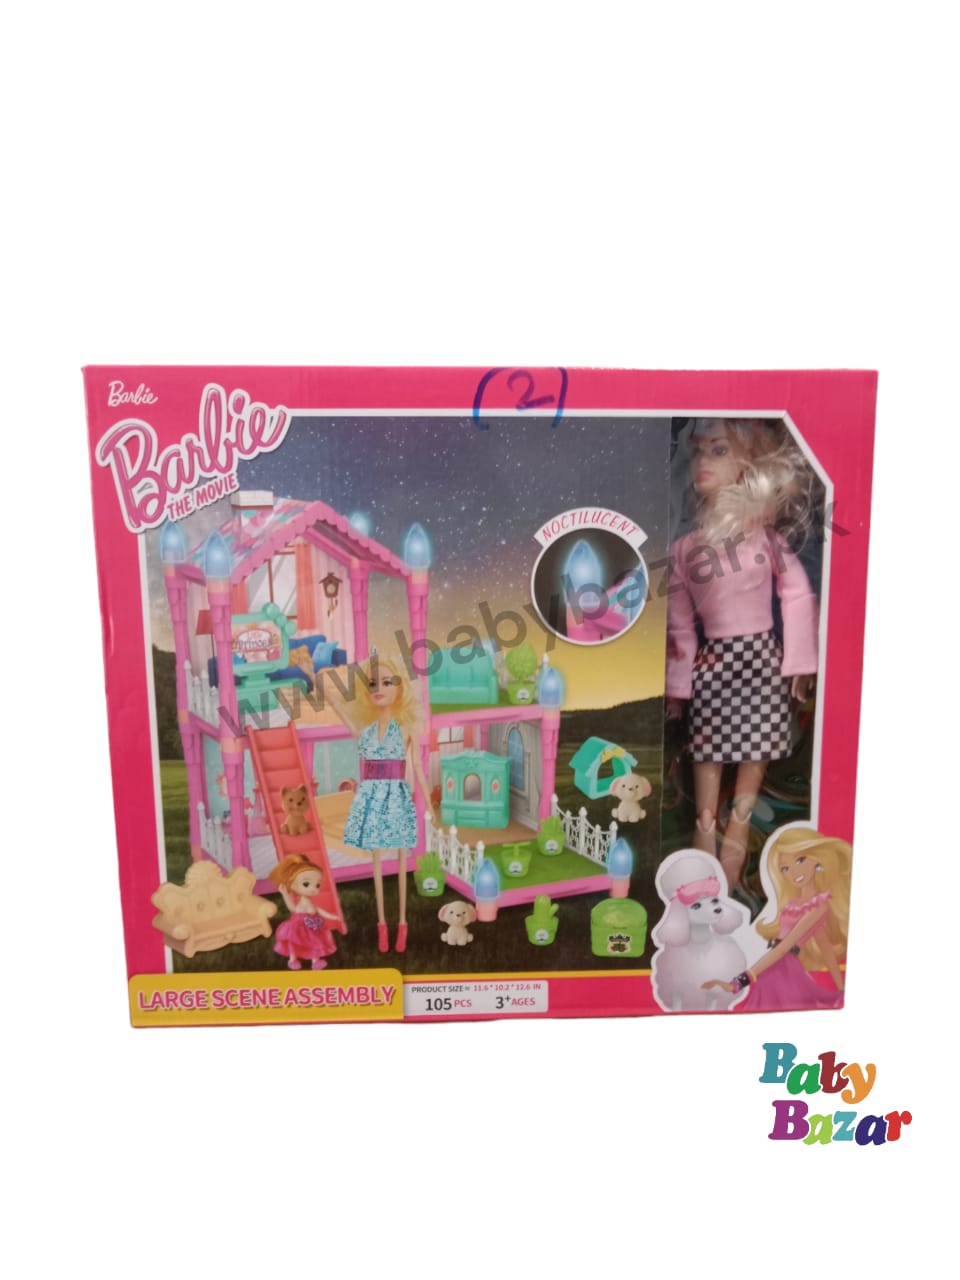 Barbie Beauty Villa Girls Doll House With Accessories